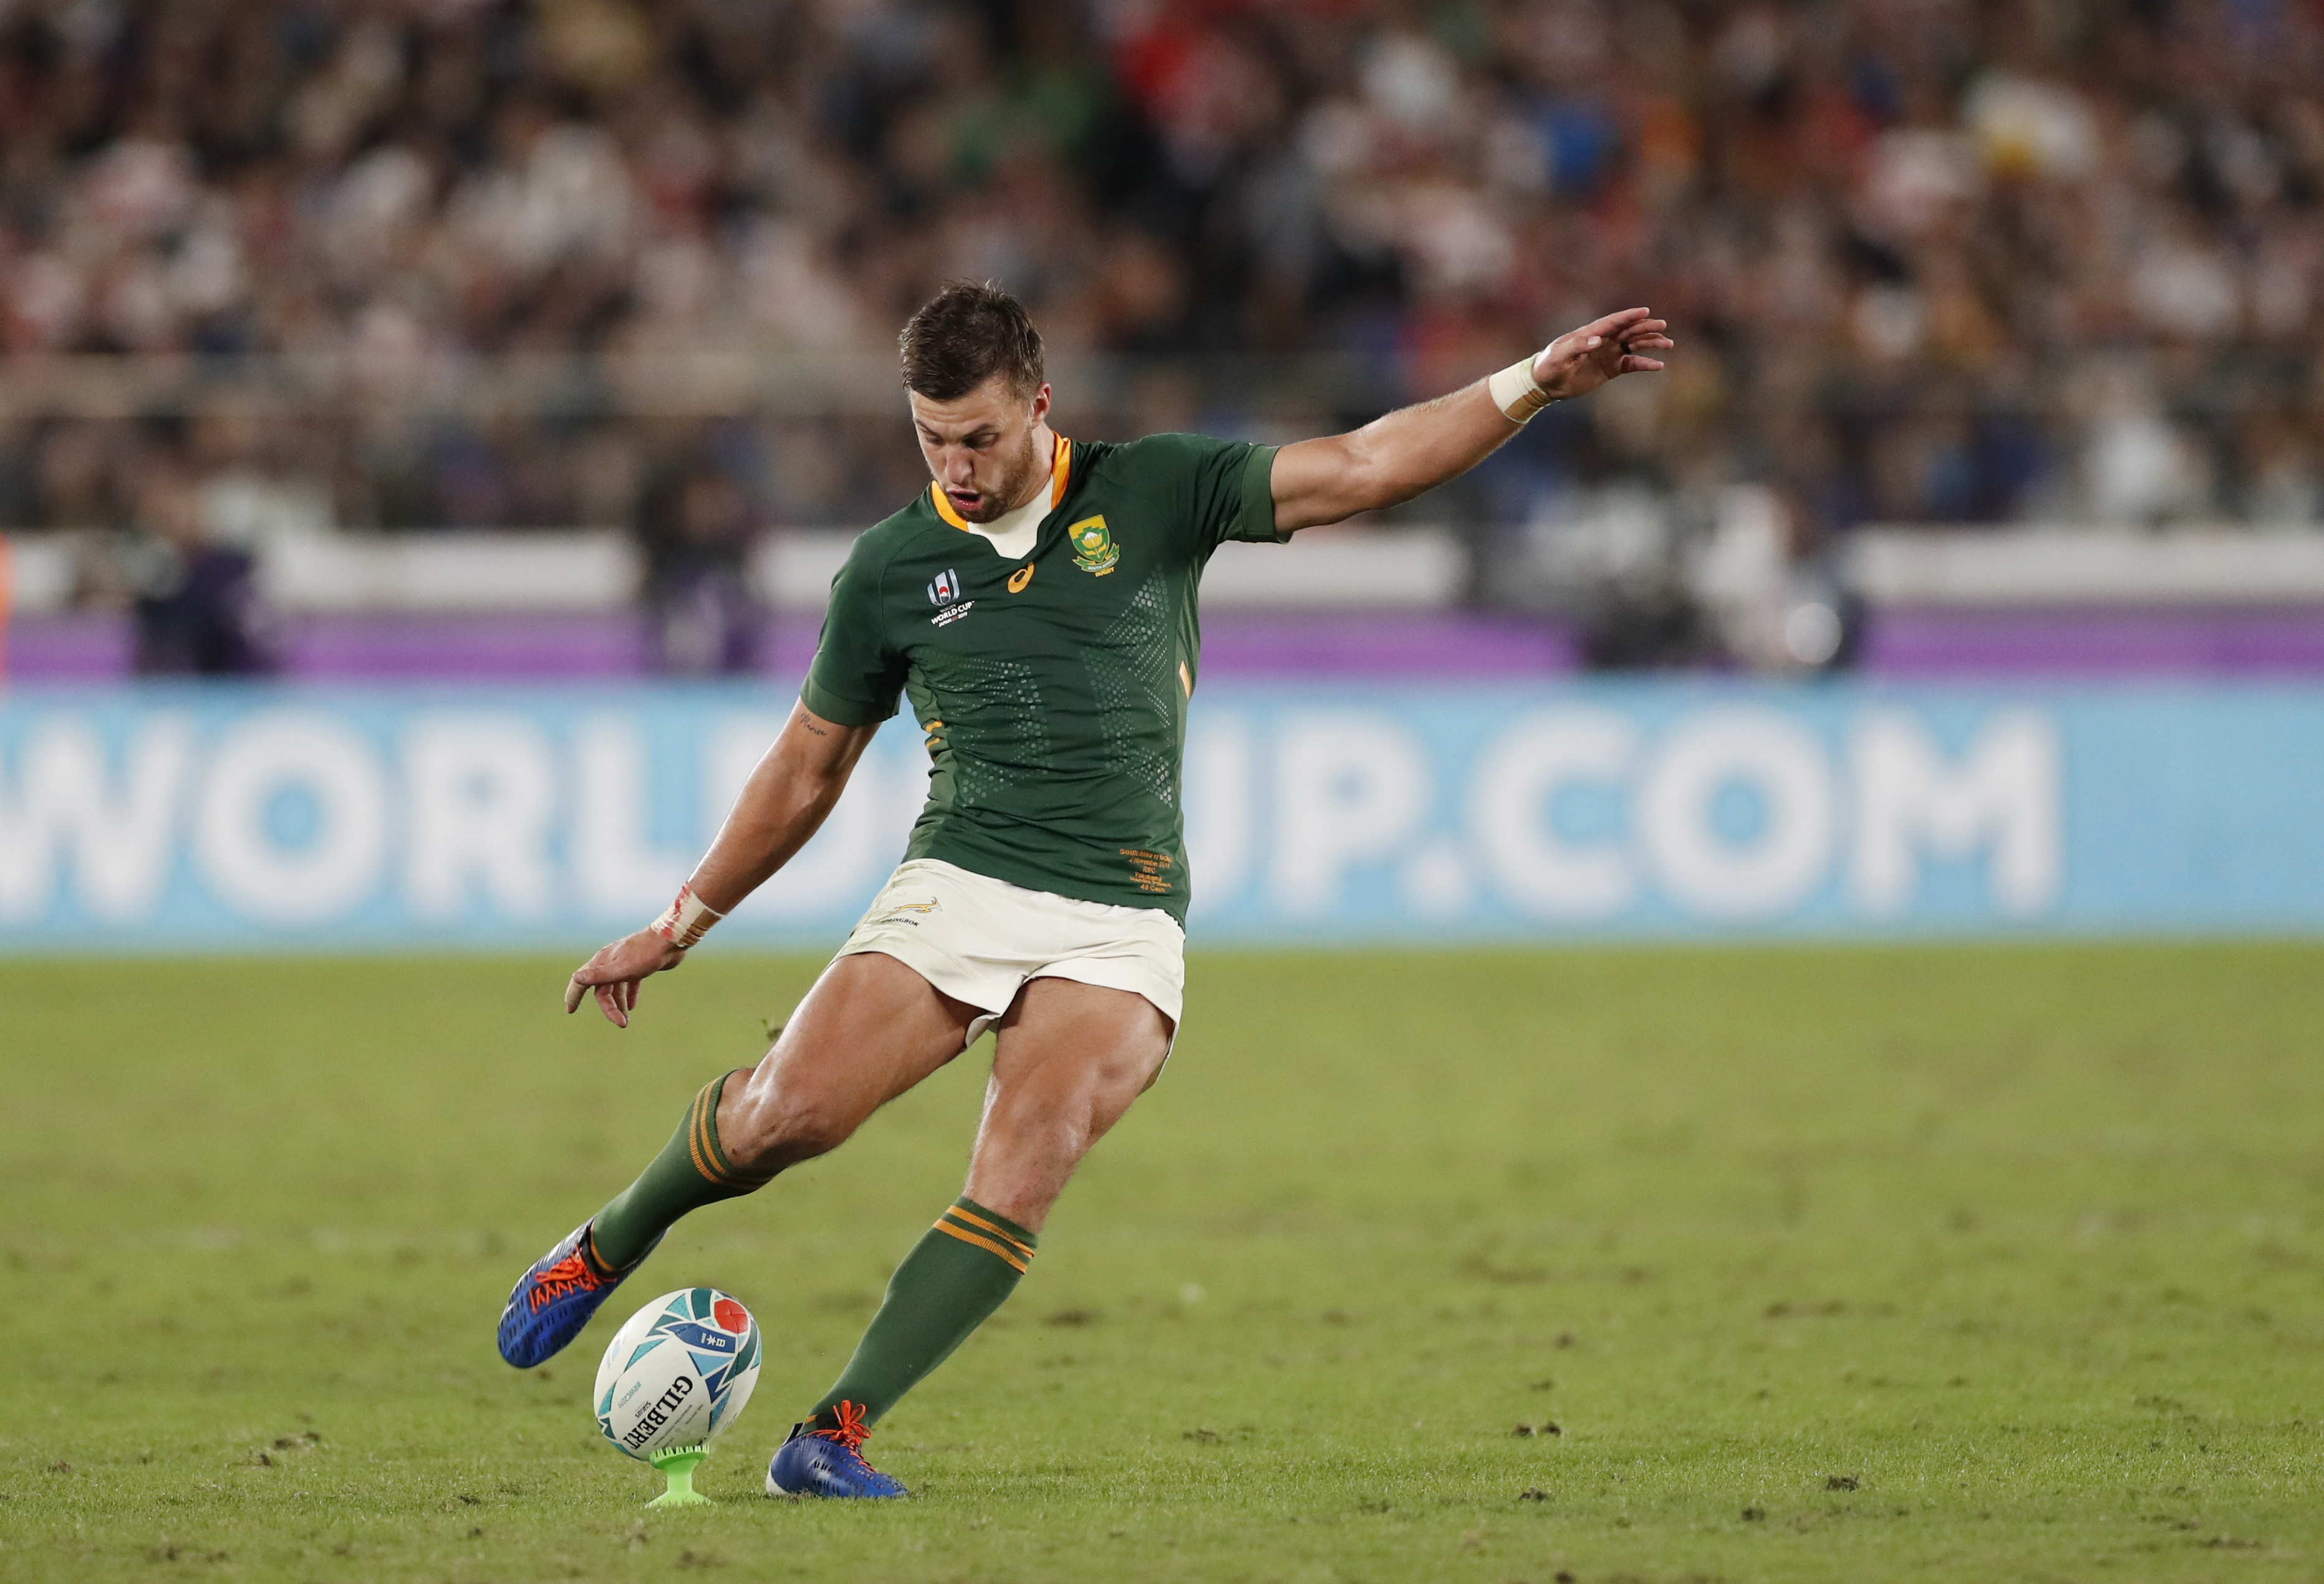 Springboks watch Pollard as decision looms on Marx replacement Reuters